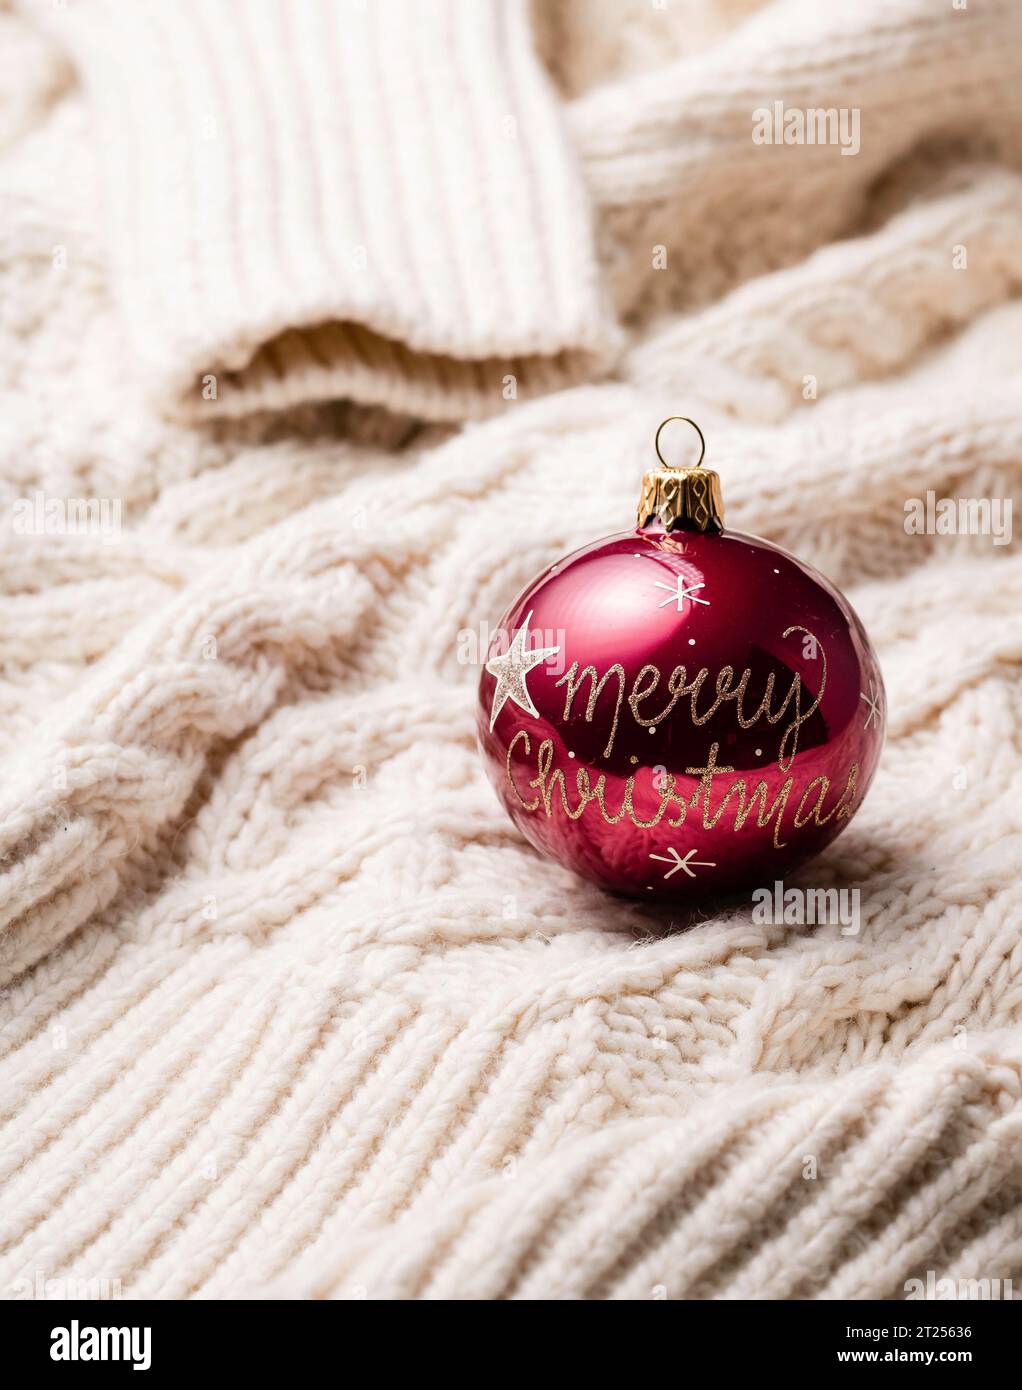 Close-up of a Christmas bauble on a knitted sweater Stock Photo